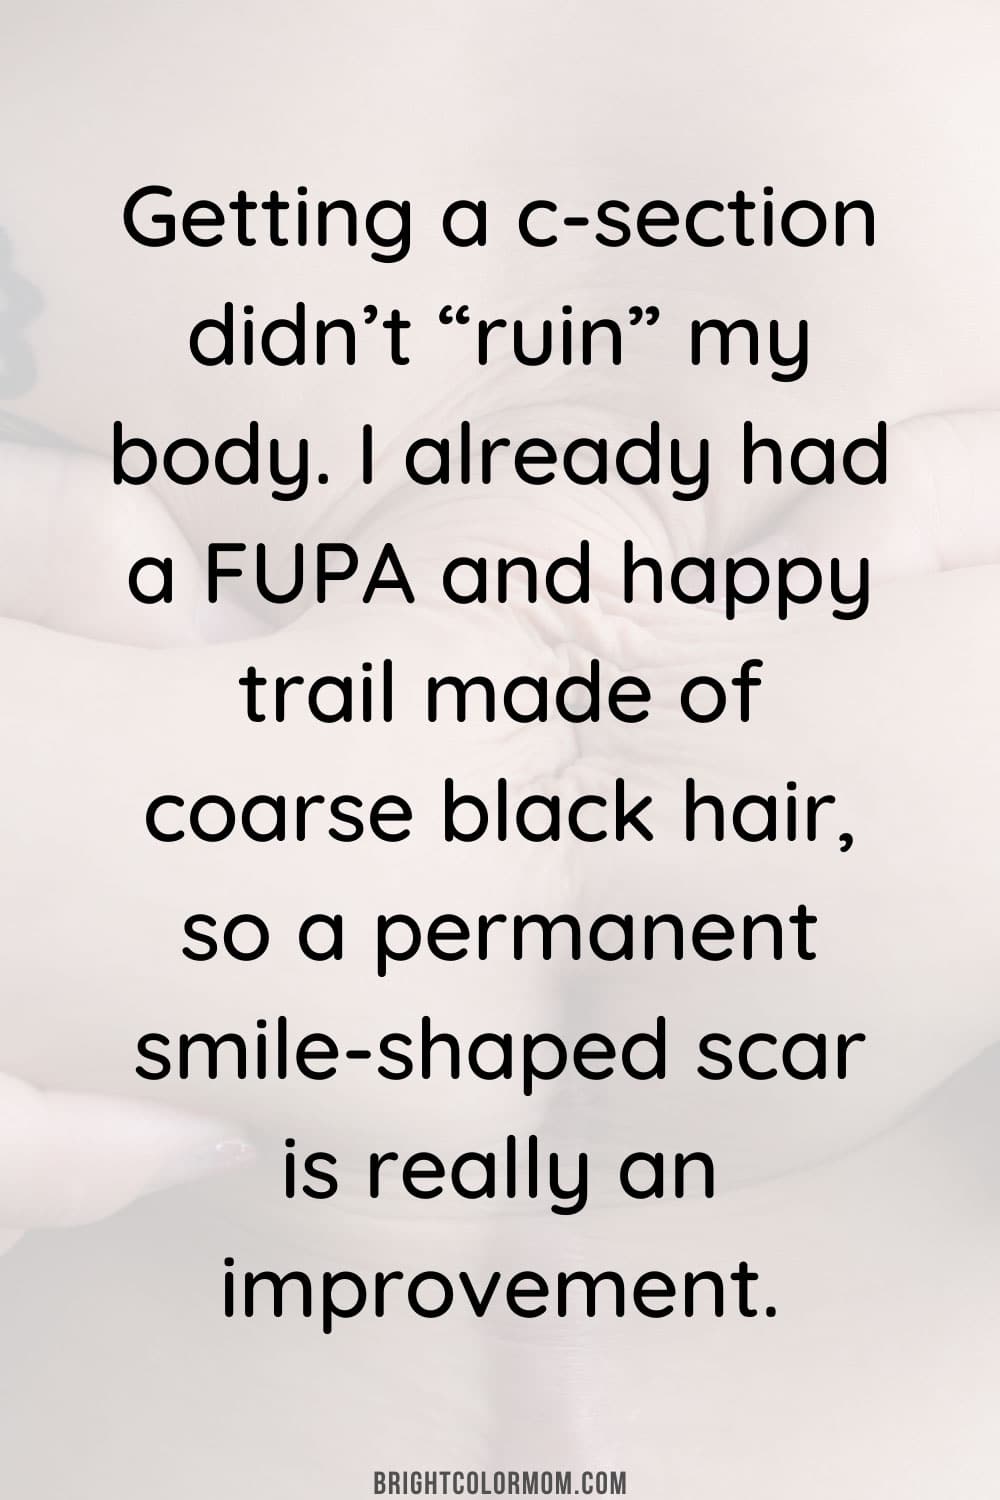 Getting a C-section didn’t “ruin” my body. I already had a FUPA and happy trail made of coarse black hair, so a permanent smile-shaped scar is really an improvement.